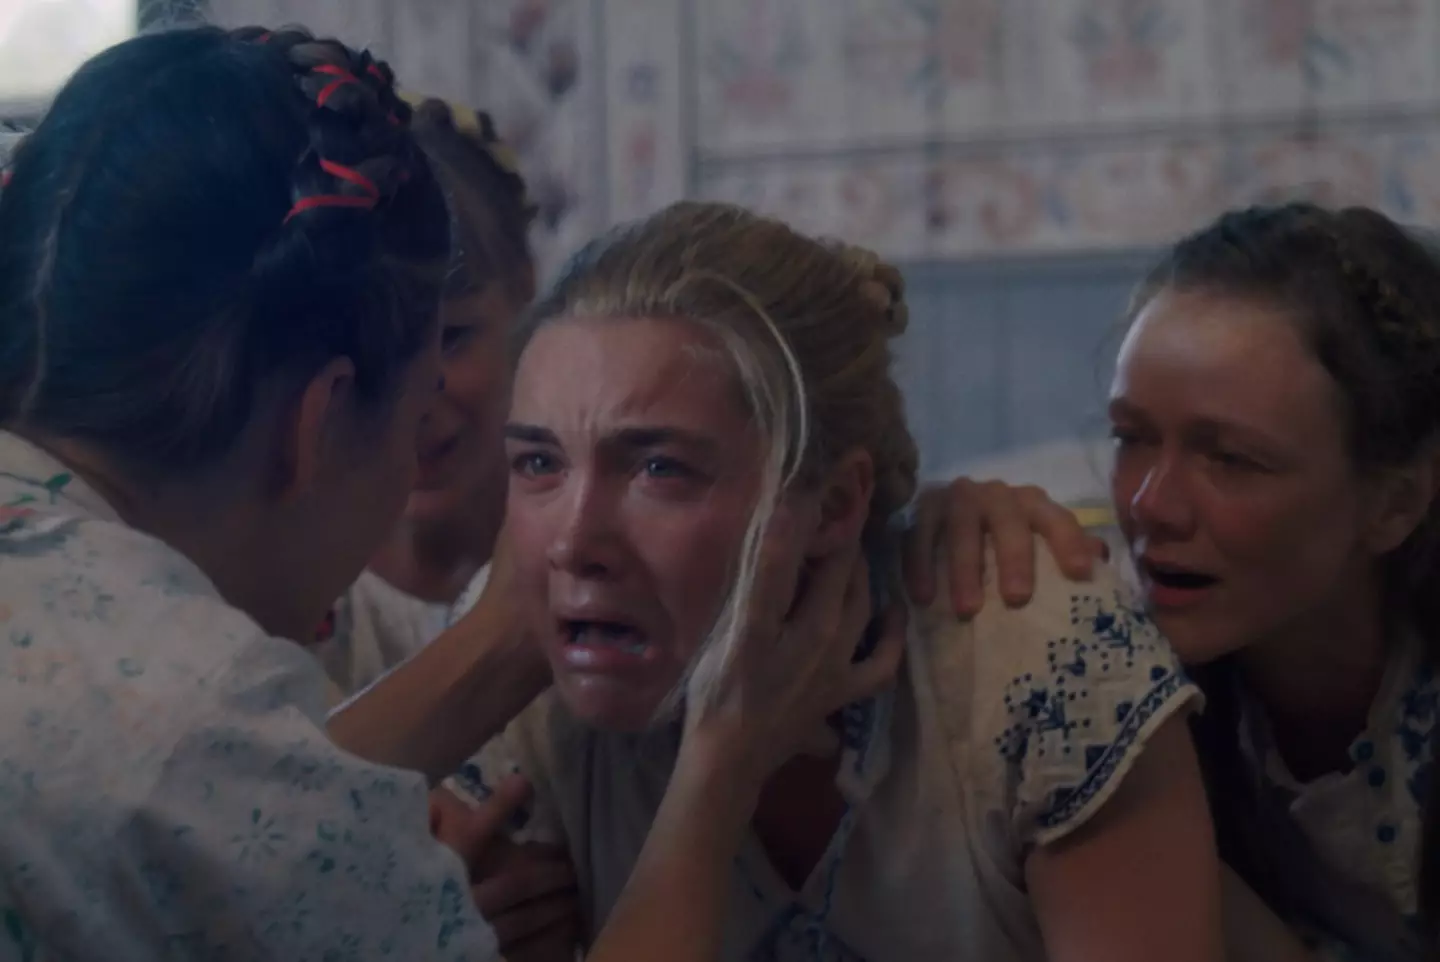 The festival which inspired 2019 horror Midsommar is set to take place this weekend.